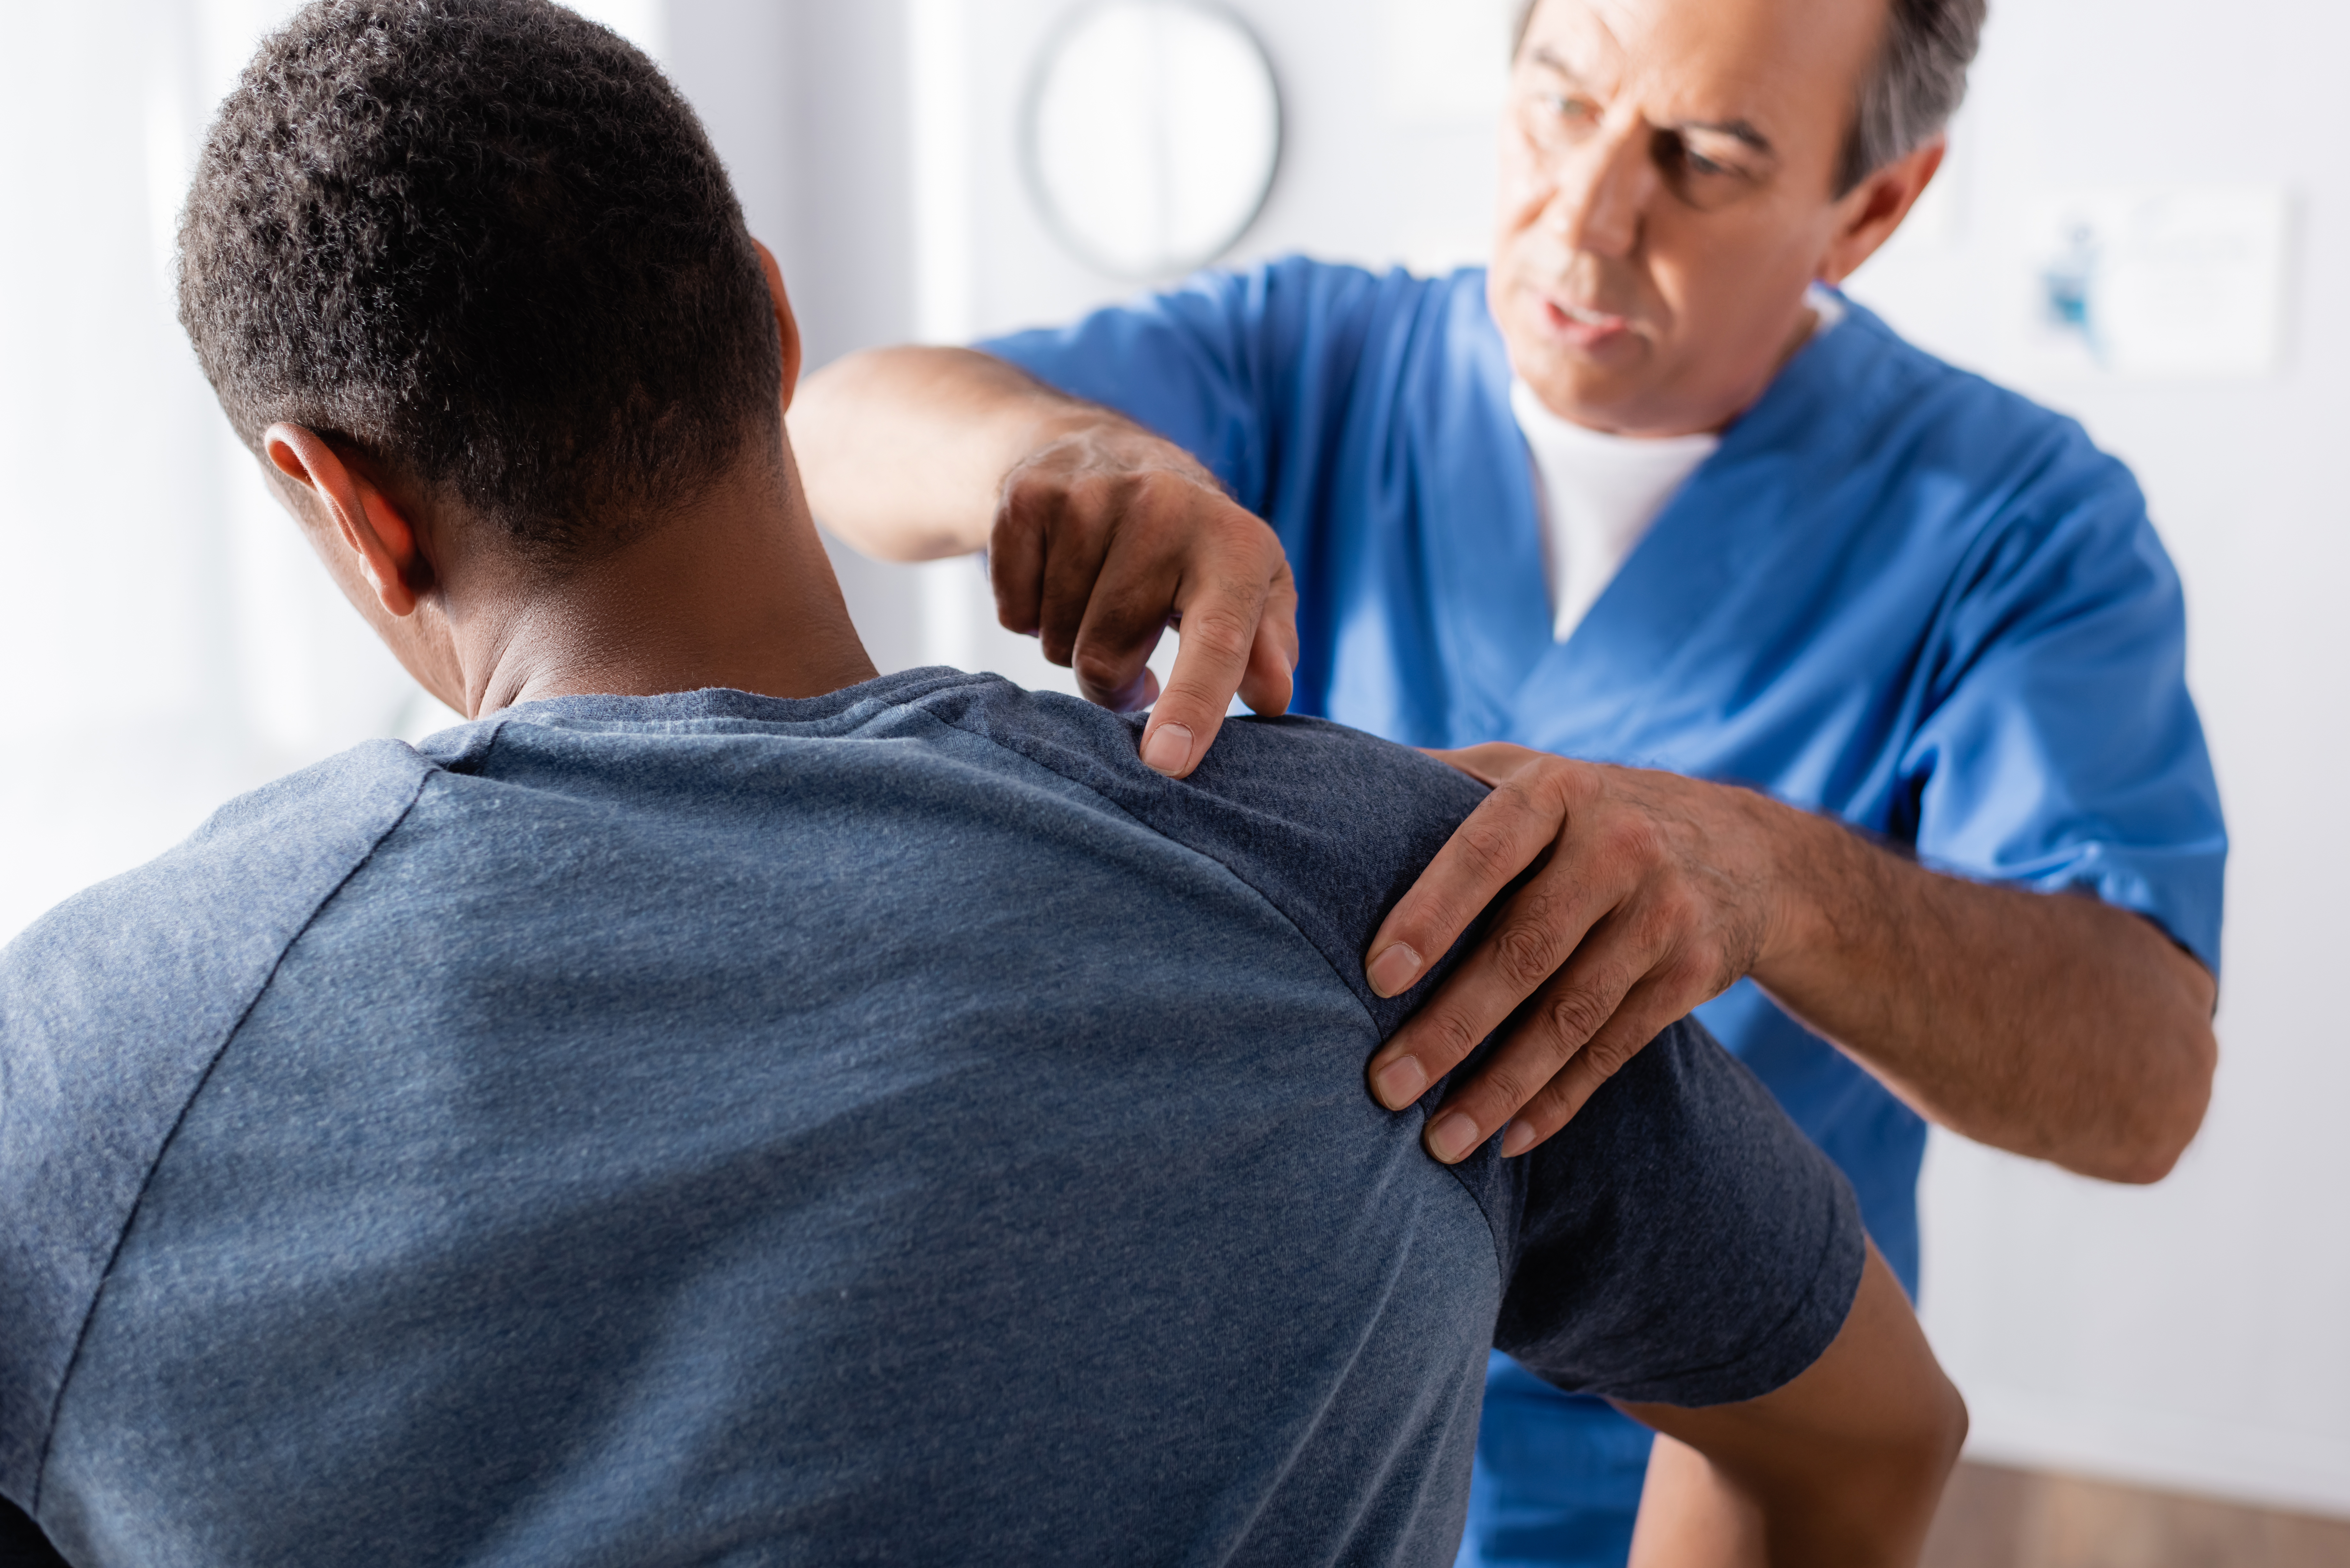  An orthopedic doctor examines a patient’s shoulder injury. 